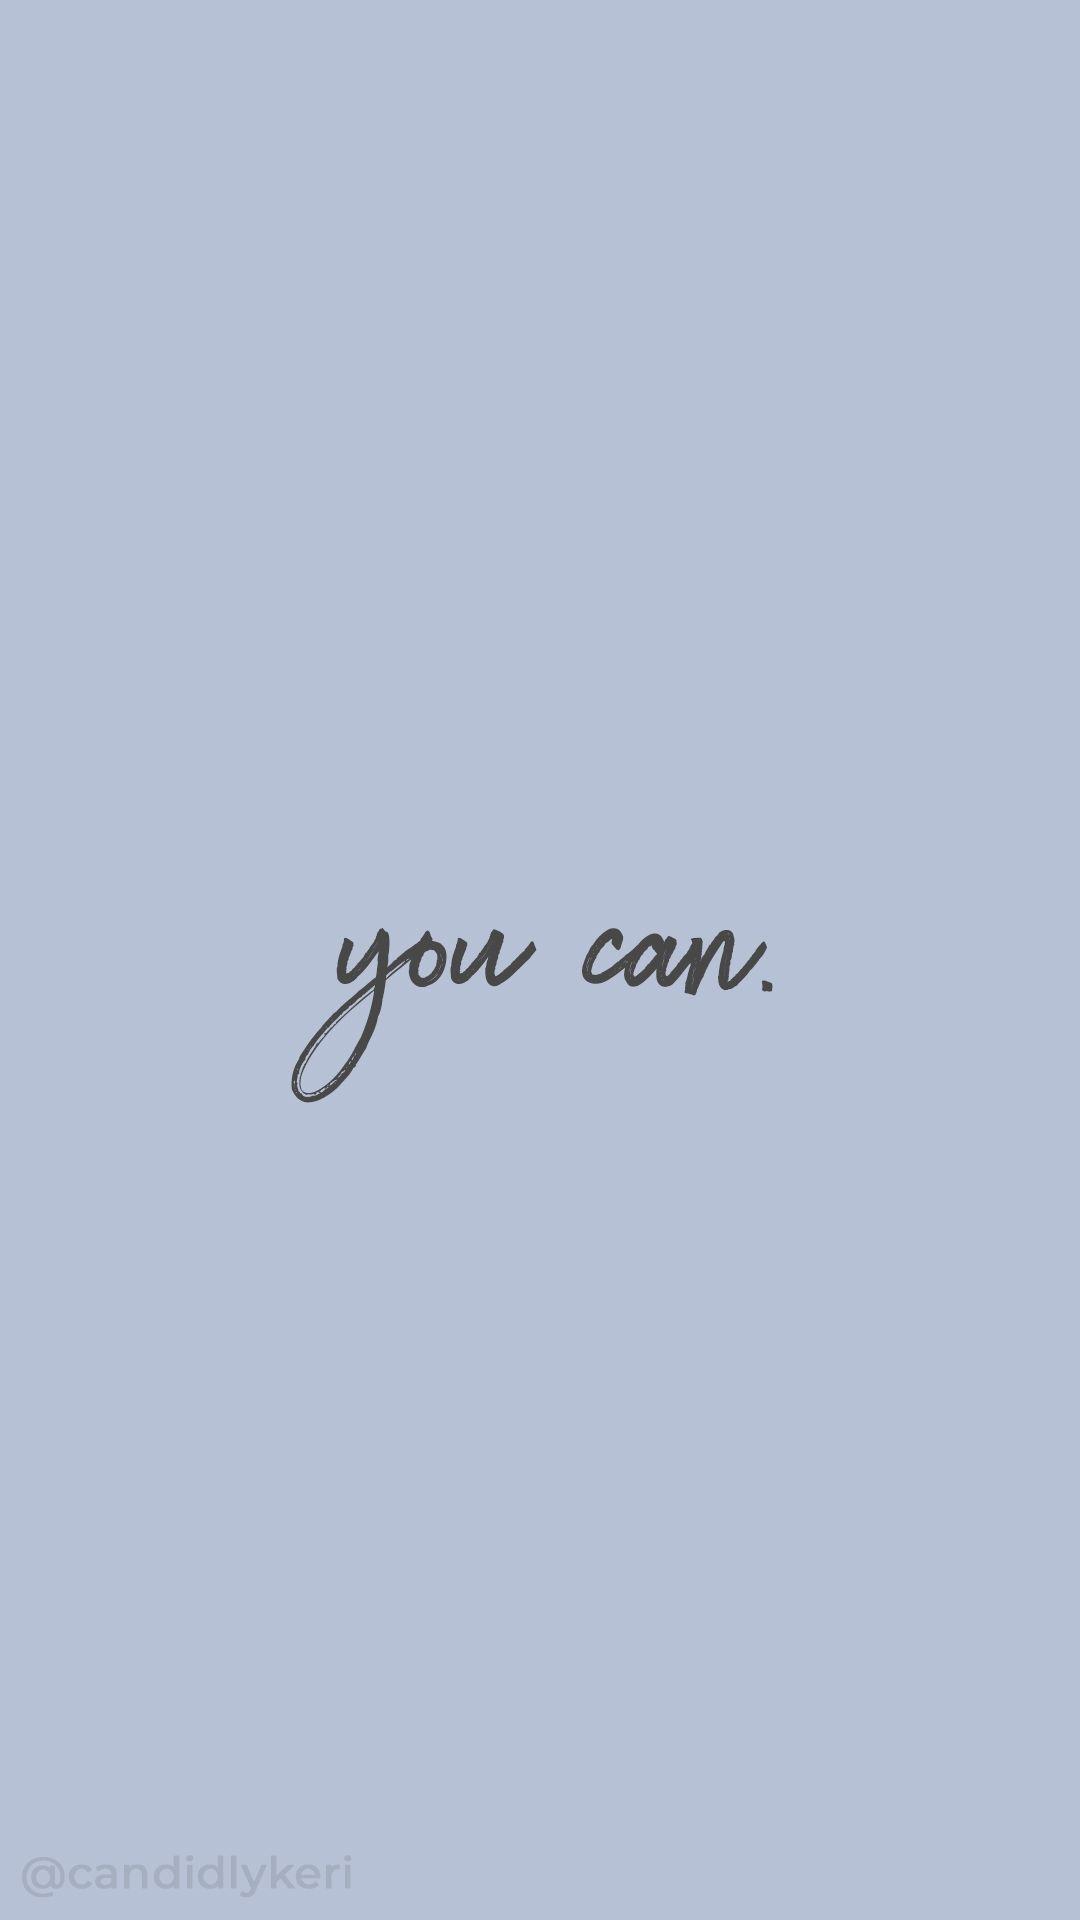 you can inspirational motivational quote gray and blue purple background wallpaper you ca. Wallpaper quotes, Inspirational quotes motivation, Inspirational quotes